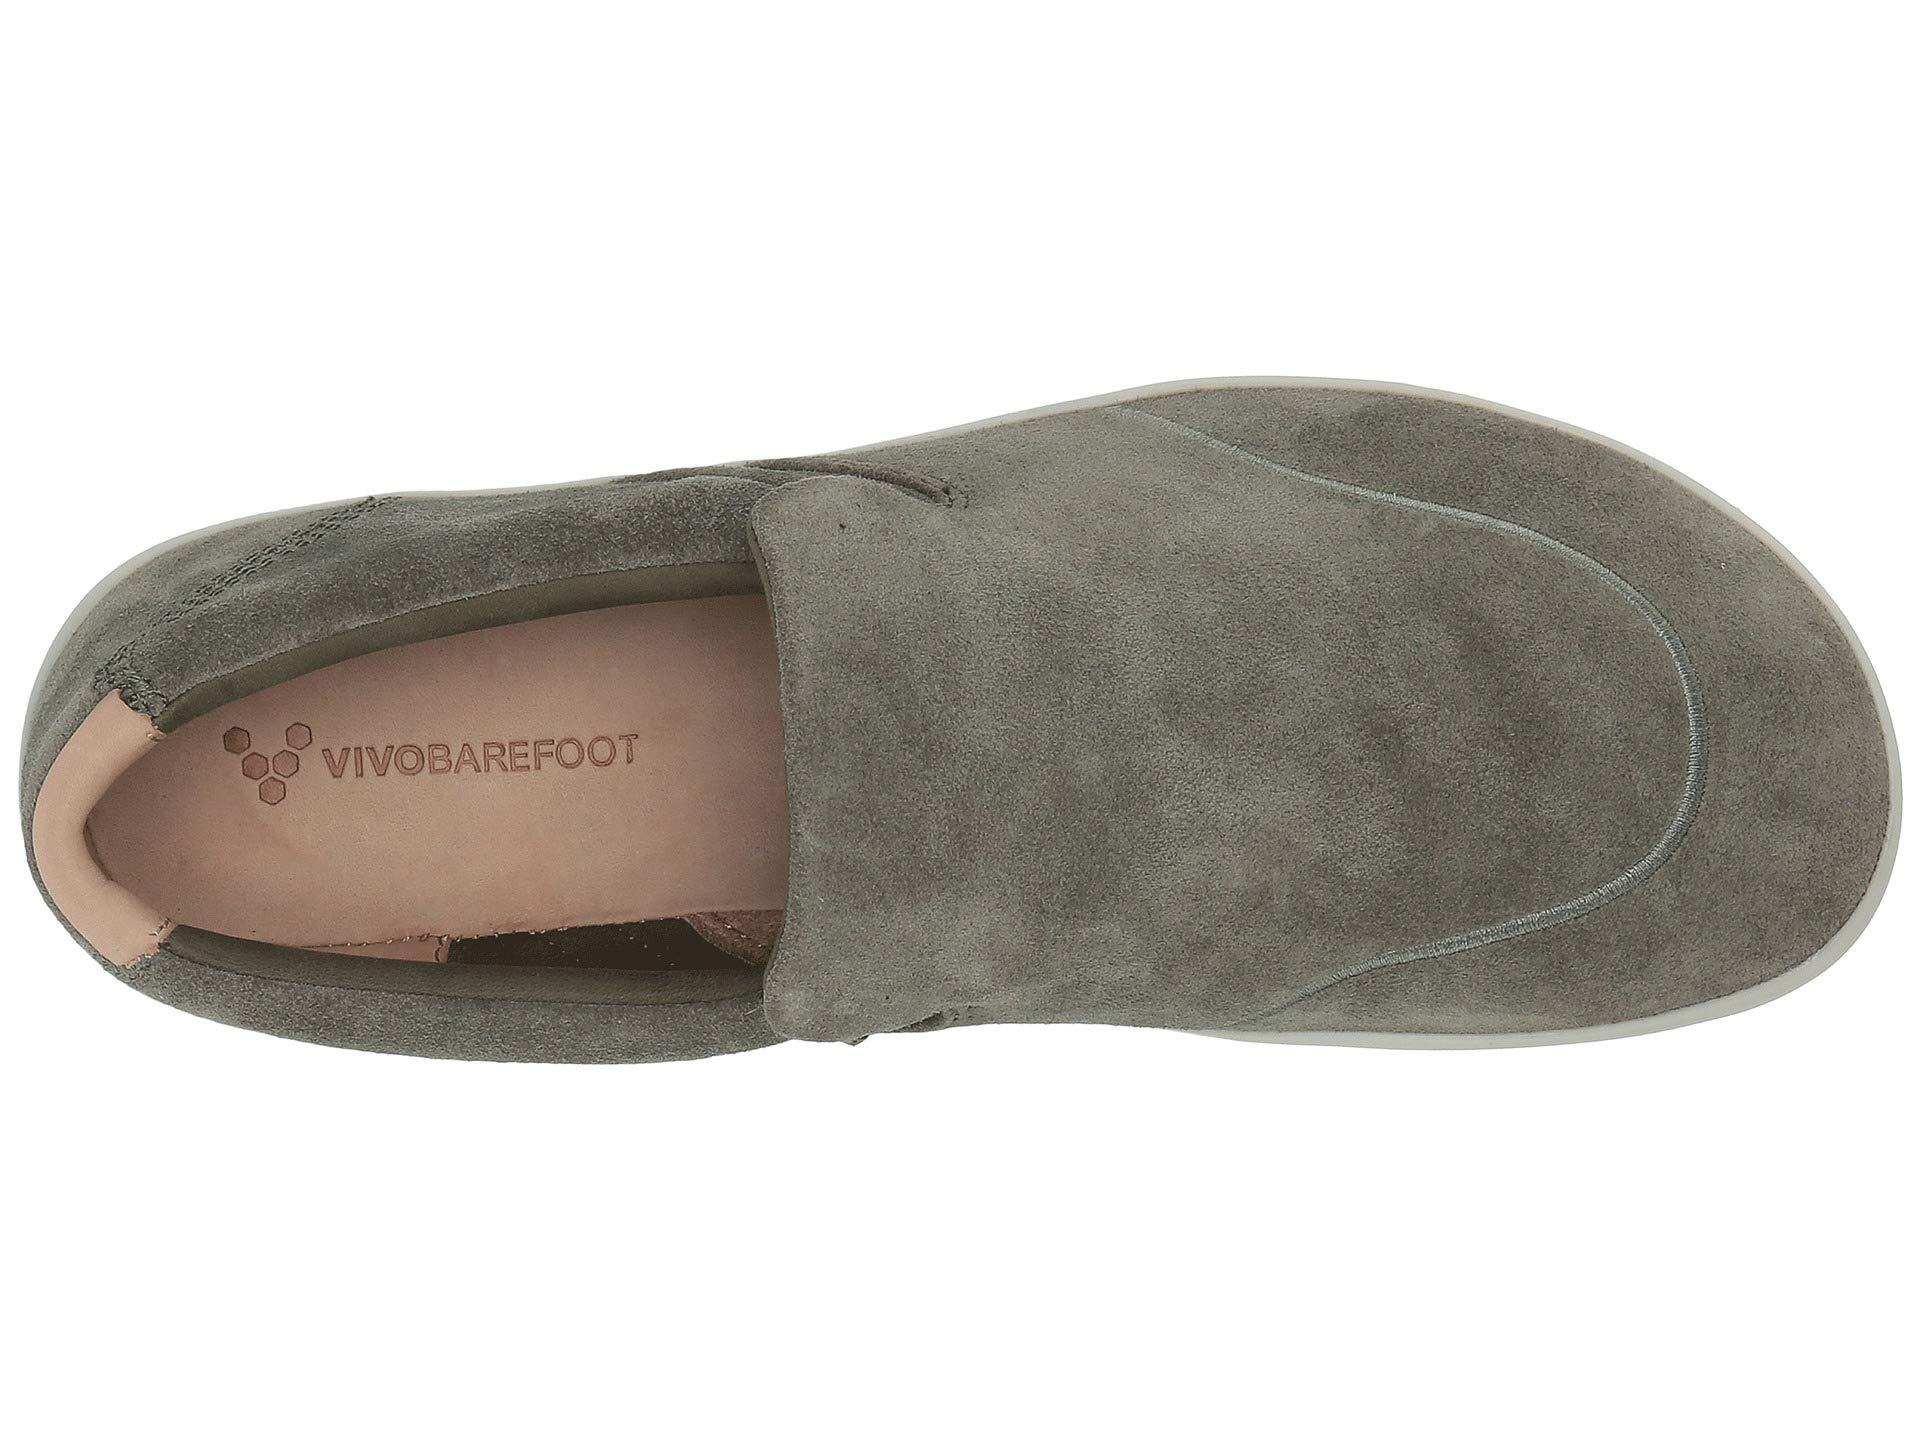 Vivobarefoot Leather Ra Slip-on in Olive (Green) - Lyst